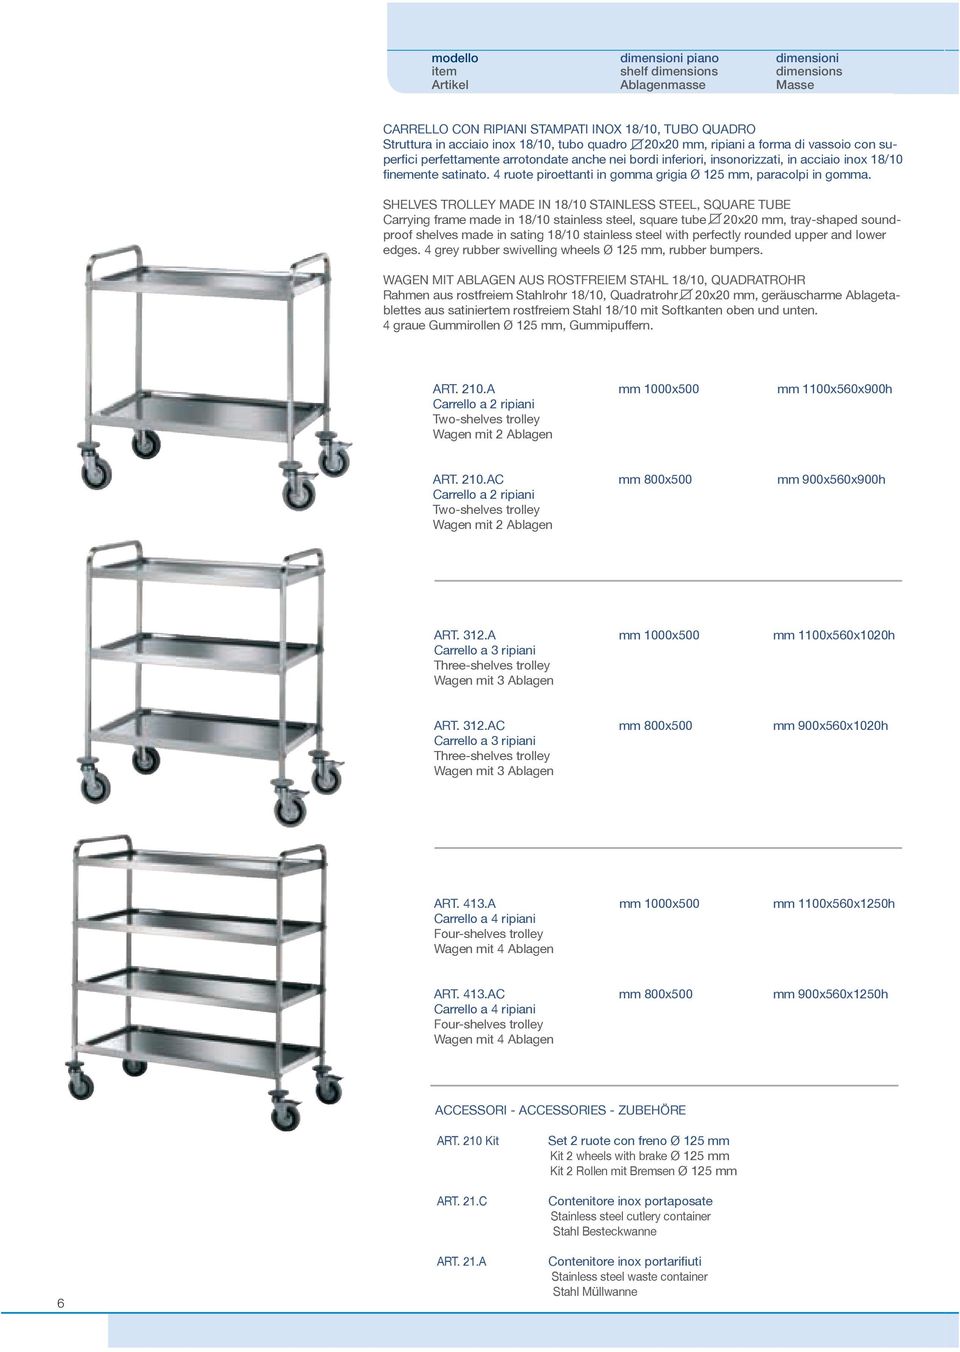 SHELVES TROLLEY MADE IN 18/10 STAINLESS STEEL, SQUARE TUBE Carrying frame made in 18/10 stainless steel, square tube 20x20 mm, tray-shaped soundproof shelves made in sating 18/10 stainless steel with